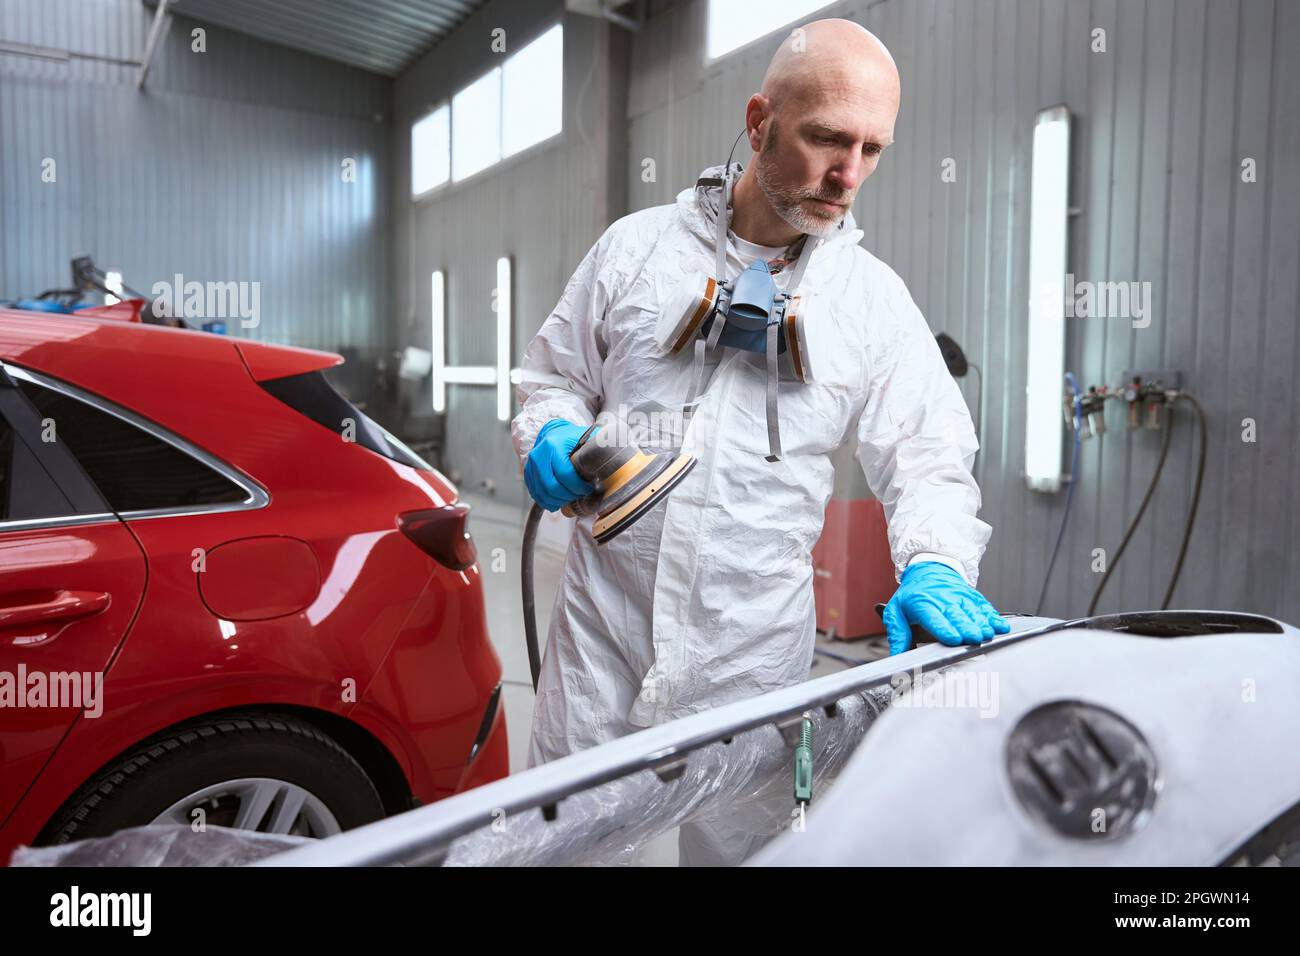 Auto repair shop employee works with unpainted car bumper Stock Photo